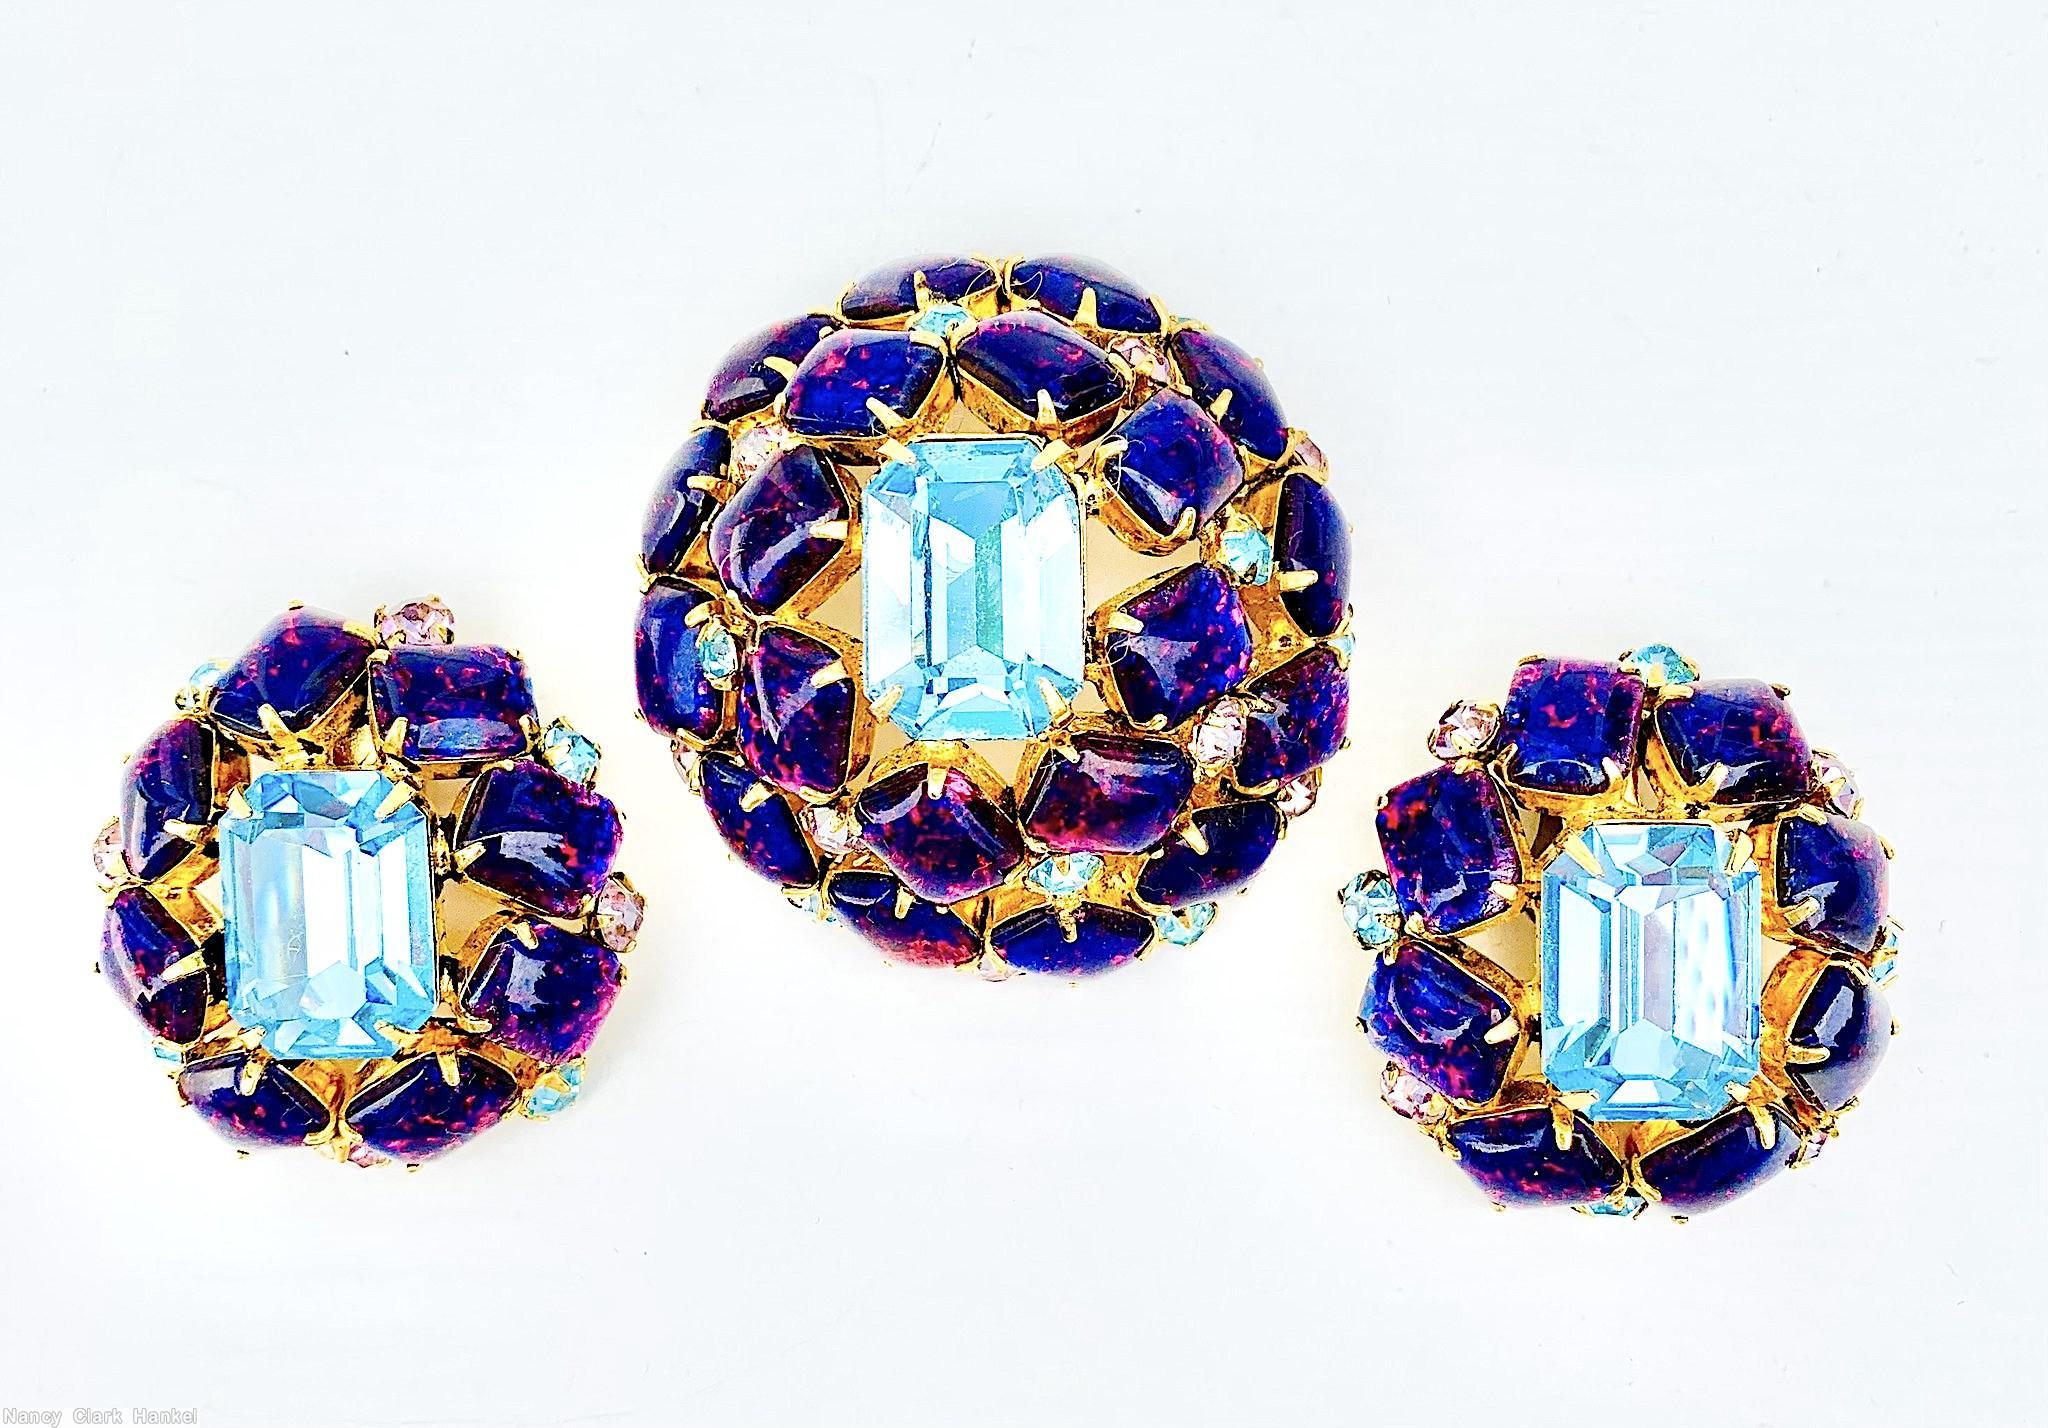 Schreiner high domed oval 20 emeçrald cut stone pin large emerald cut center 8 surrounding stone 12 second round stone small chaton ice blue pink fluss lapis goldtone jewelry